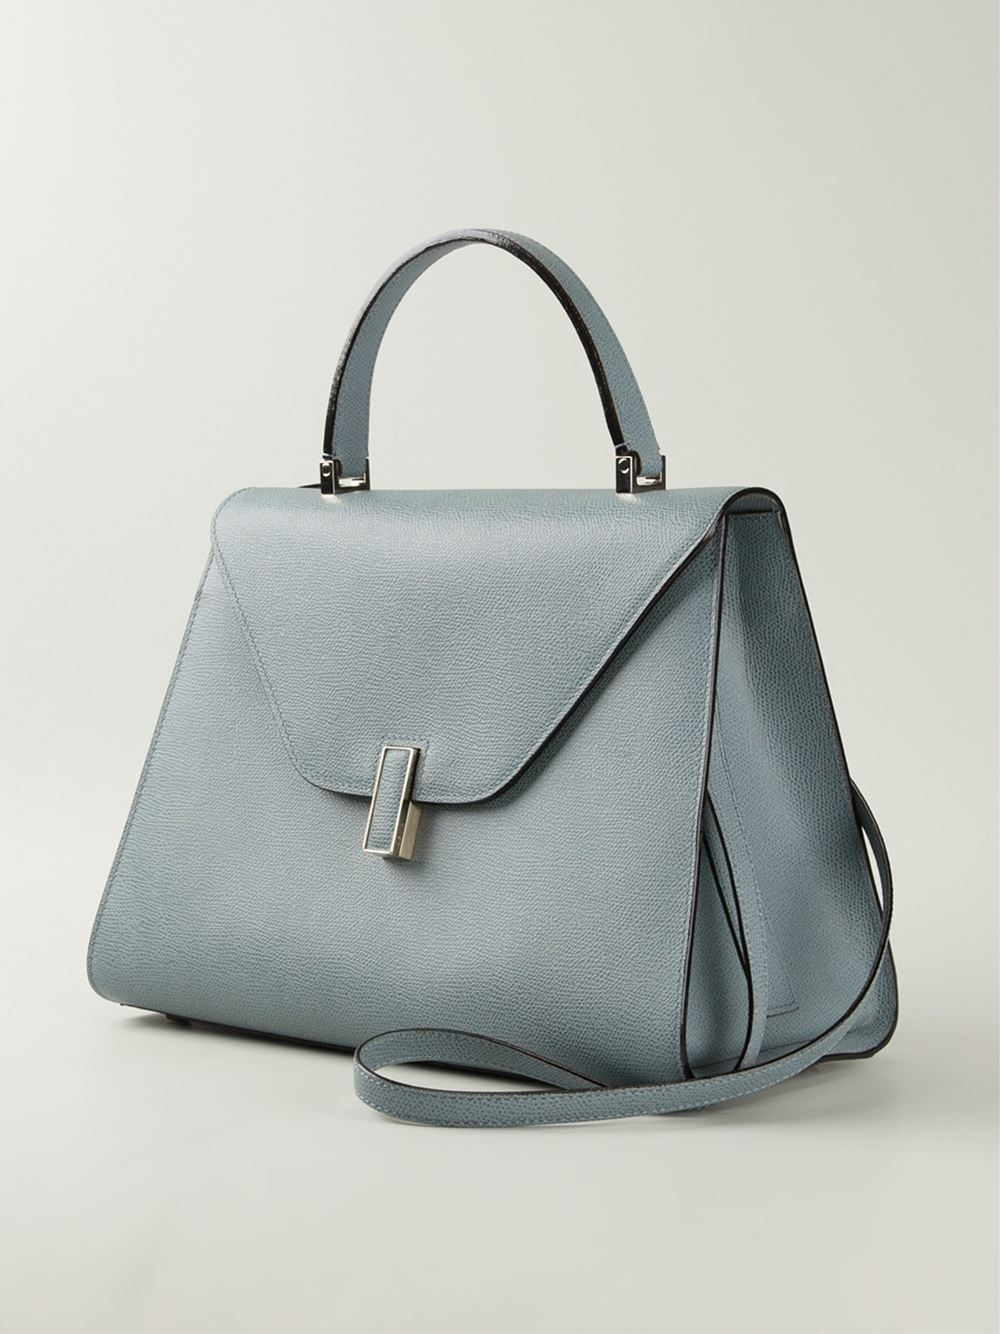 Valextra Fold Over Tote Bag in Blue - Lyst